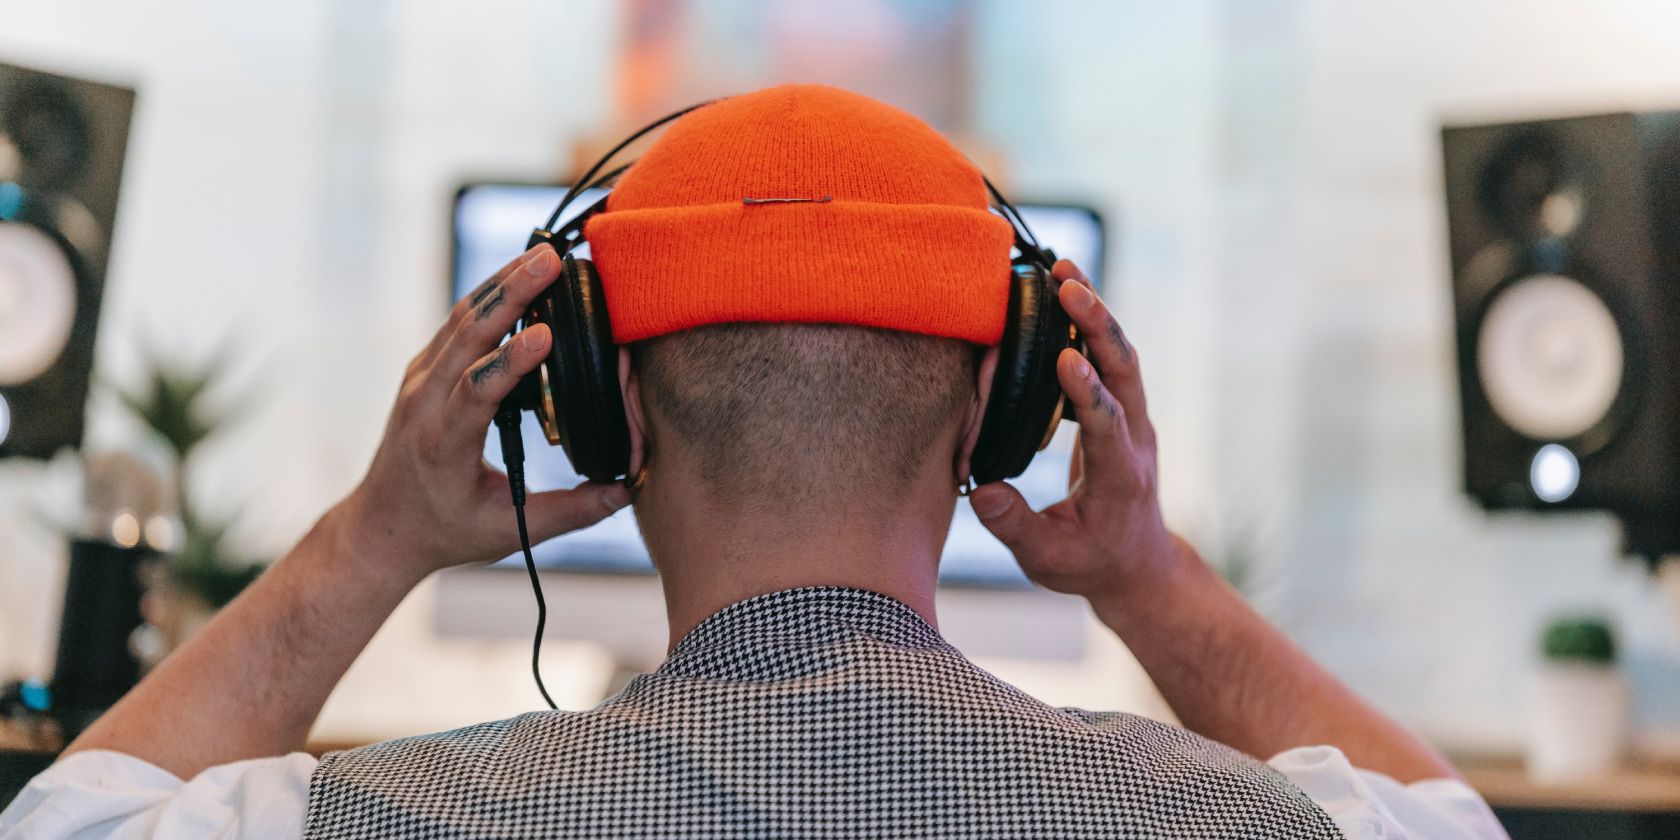 person wearing headphones in front of pc